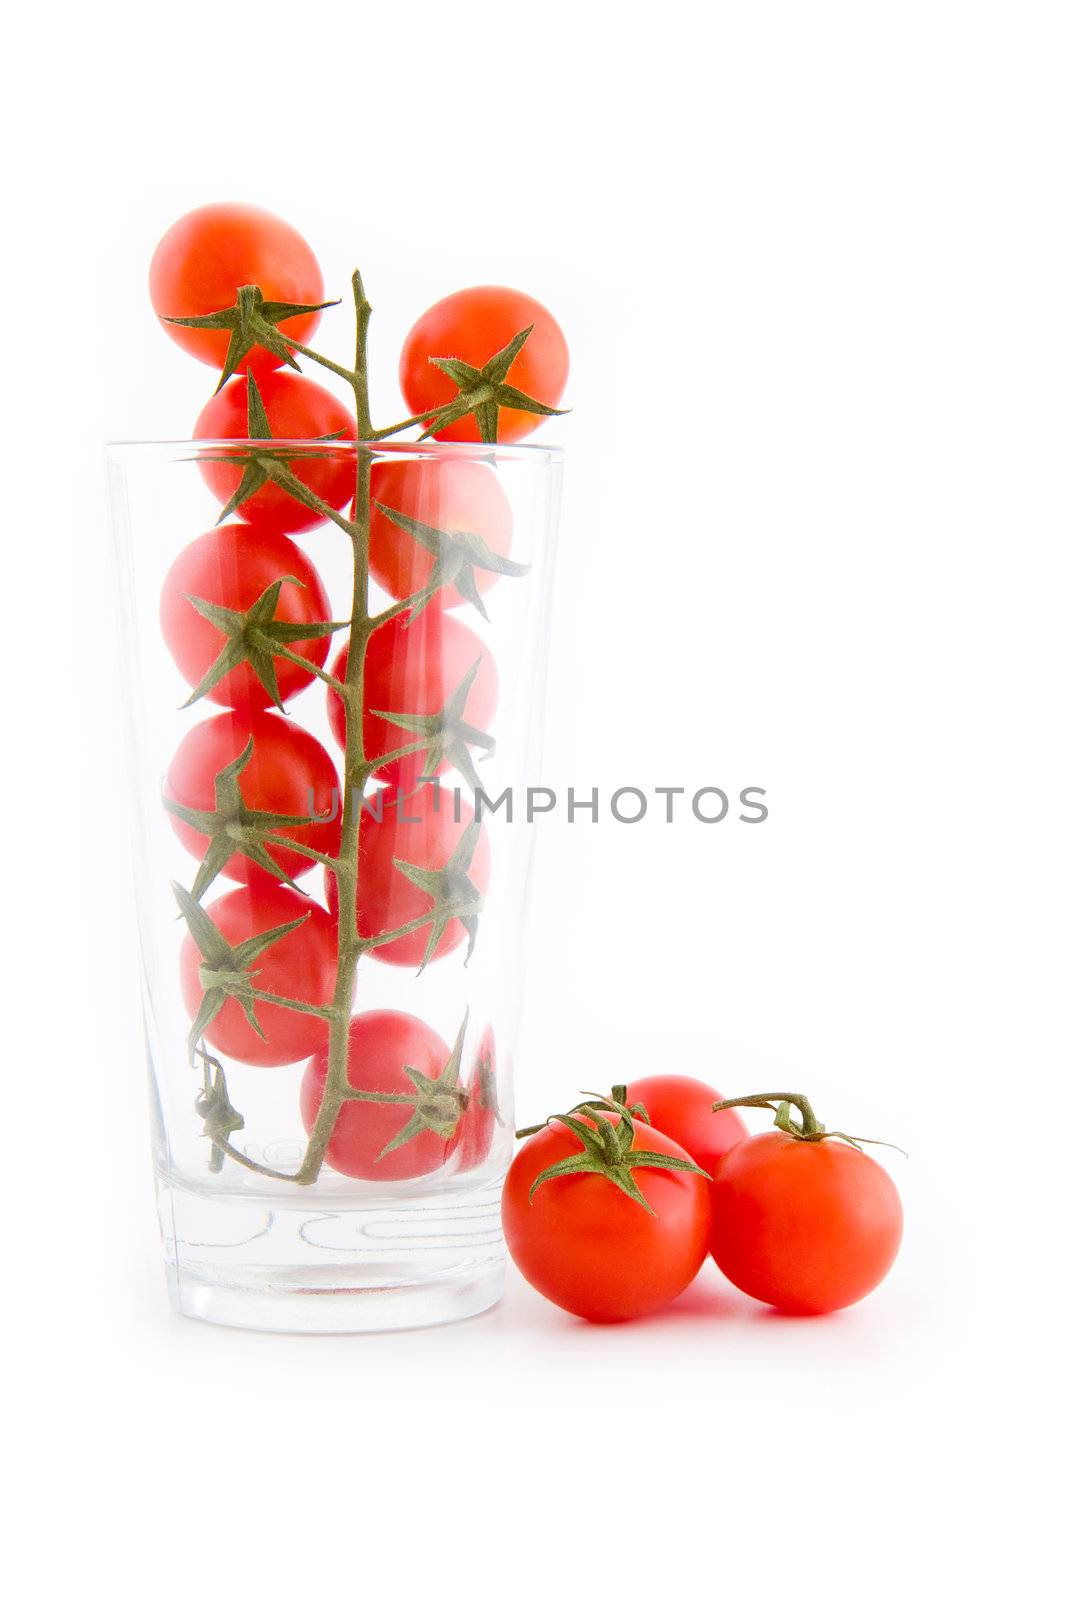 Tomatoes in a glass by Gbuglok